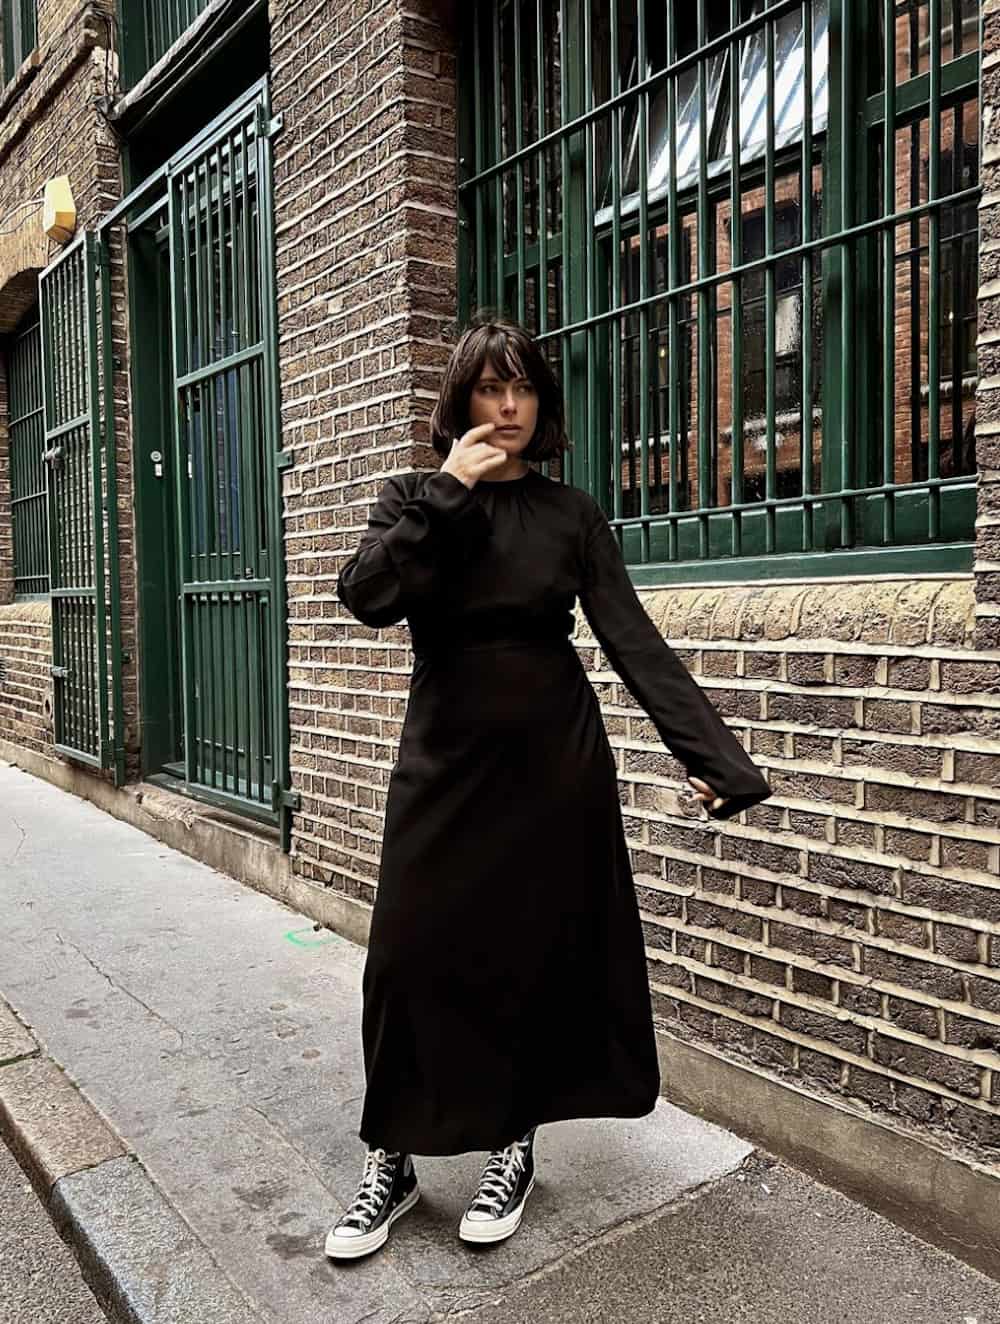 Woman wearing a black dress and sneakers.